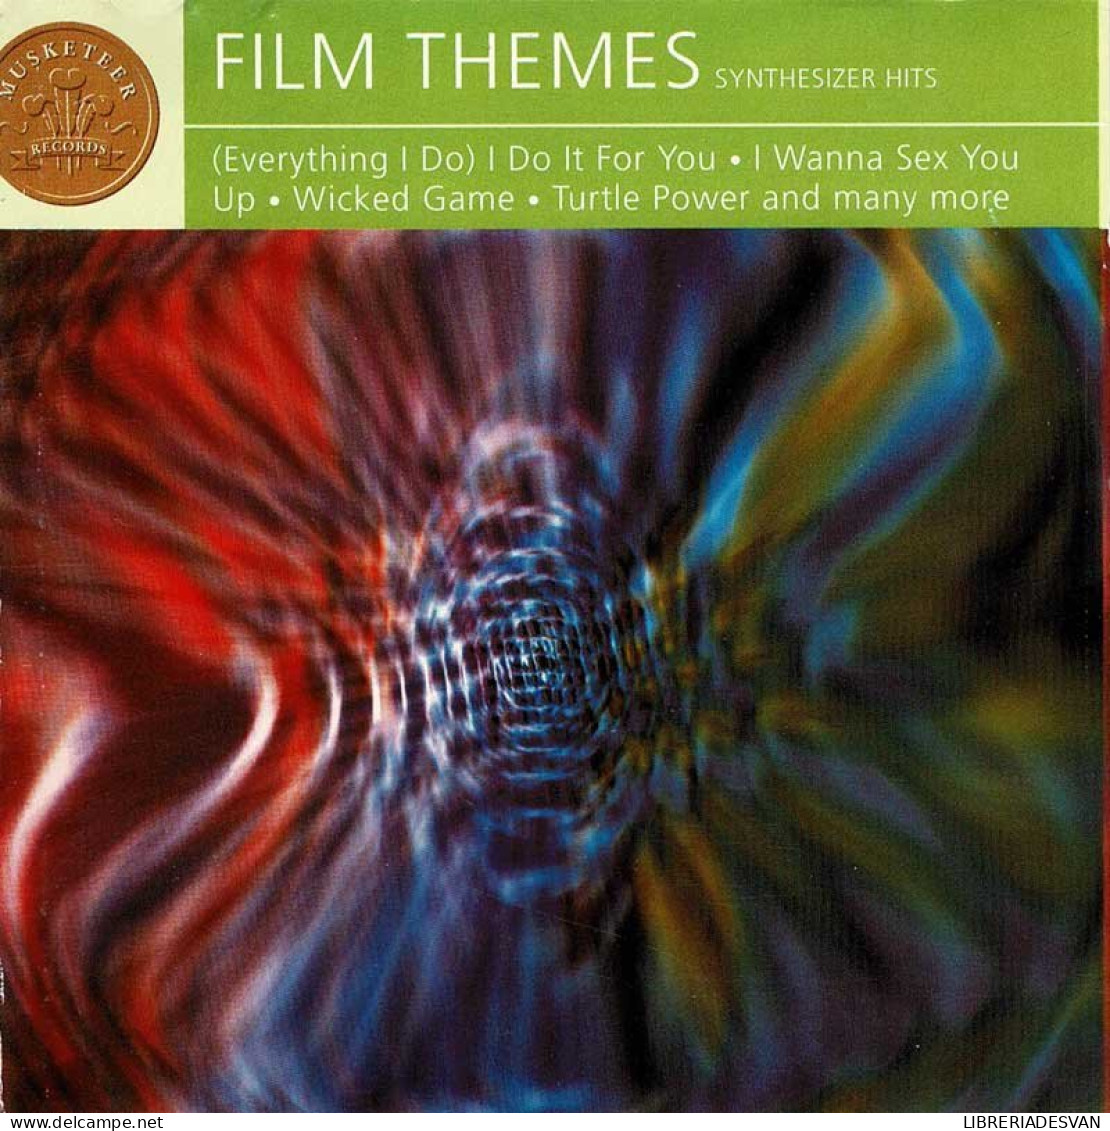 The London Studio Orchestra, The Hollywood Studio Orchestra - Film Themes Synthesizer Hits. CD - Musique De Films